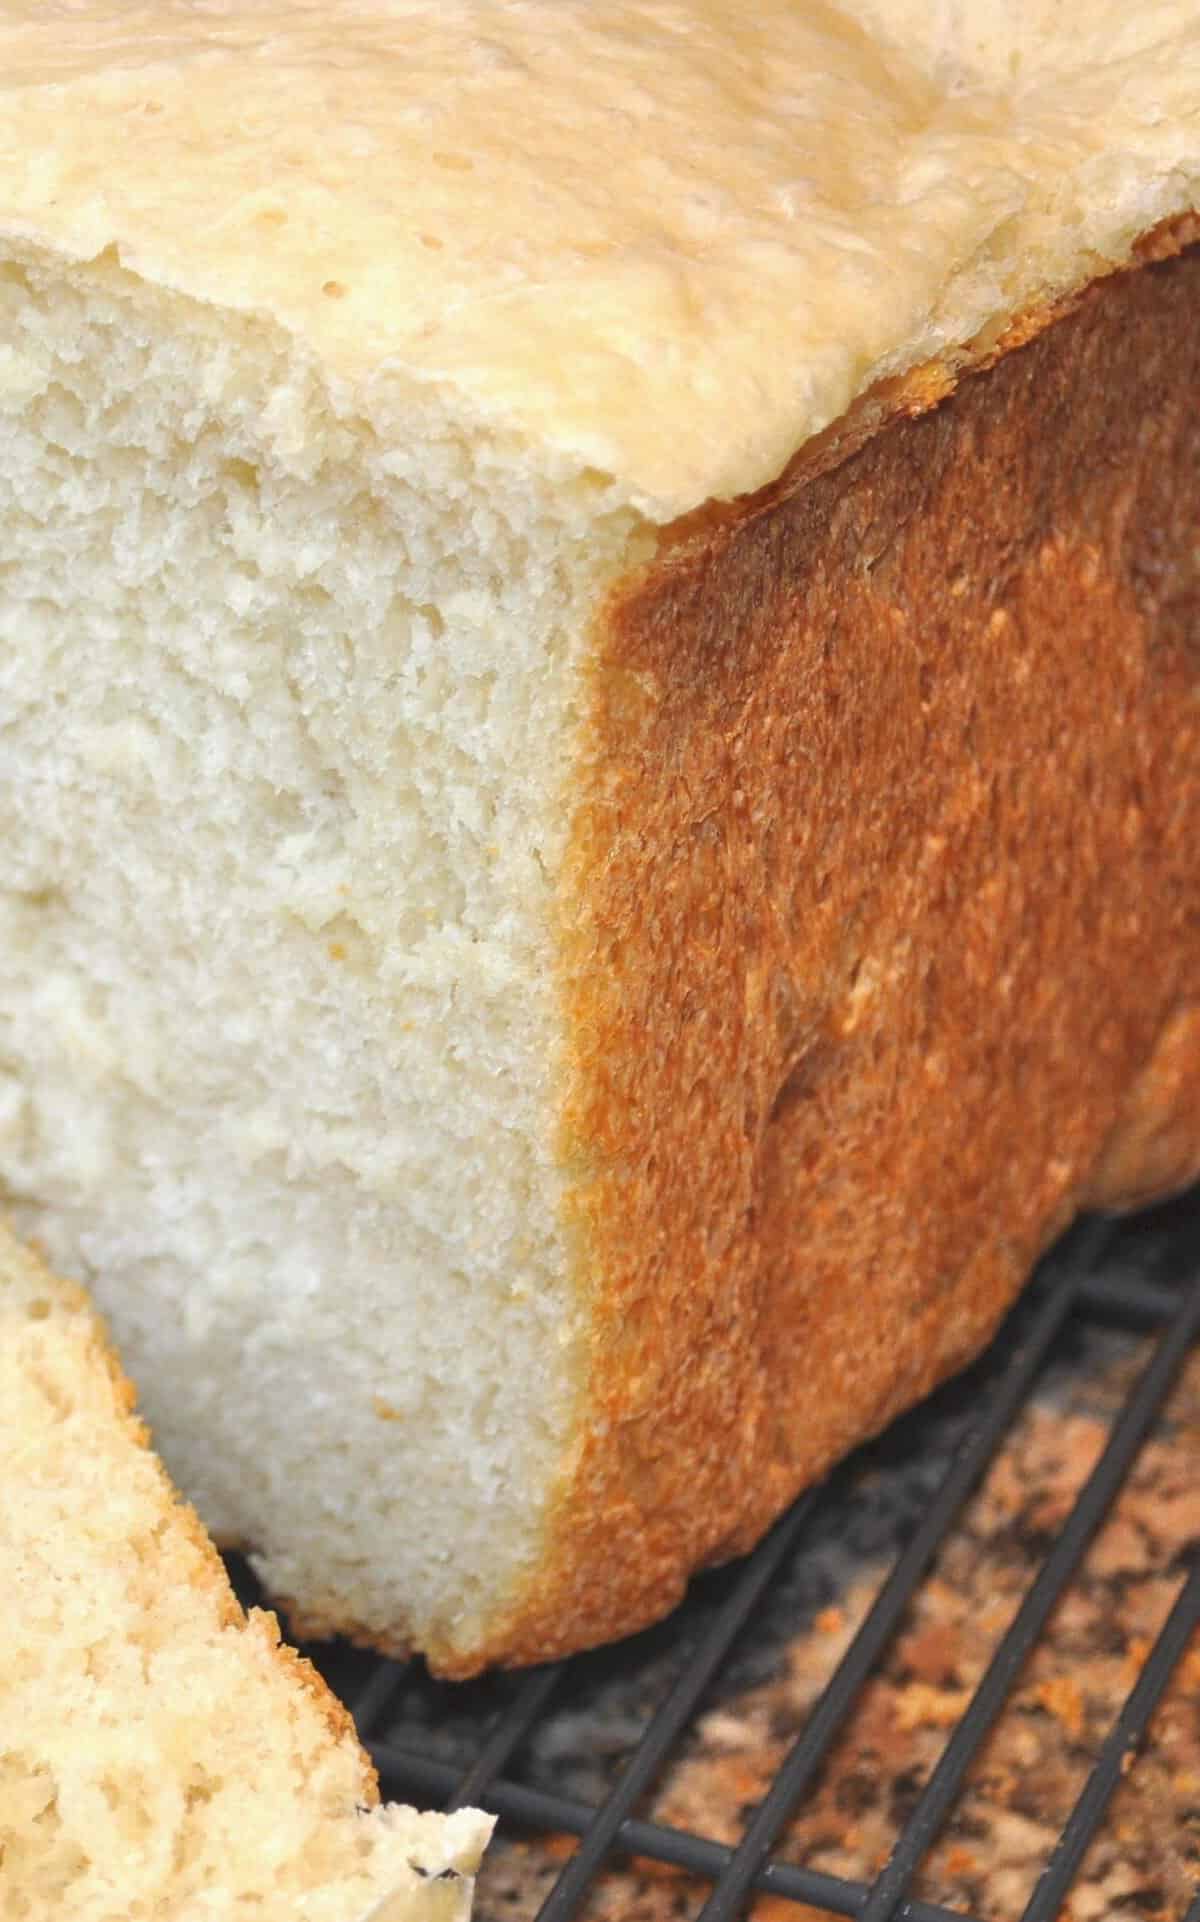 Deliciously Tangy: Homemade Sourdough French Bread Recipe